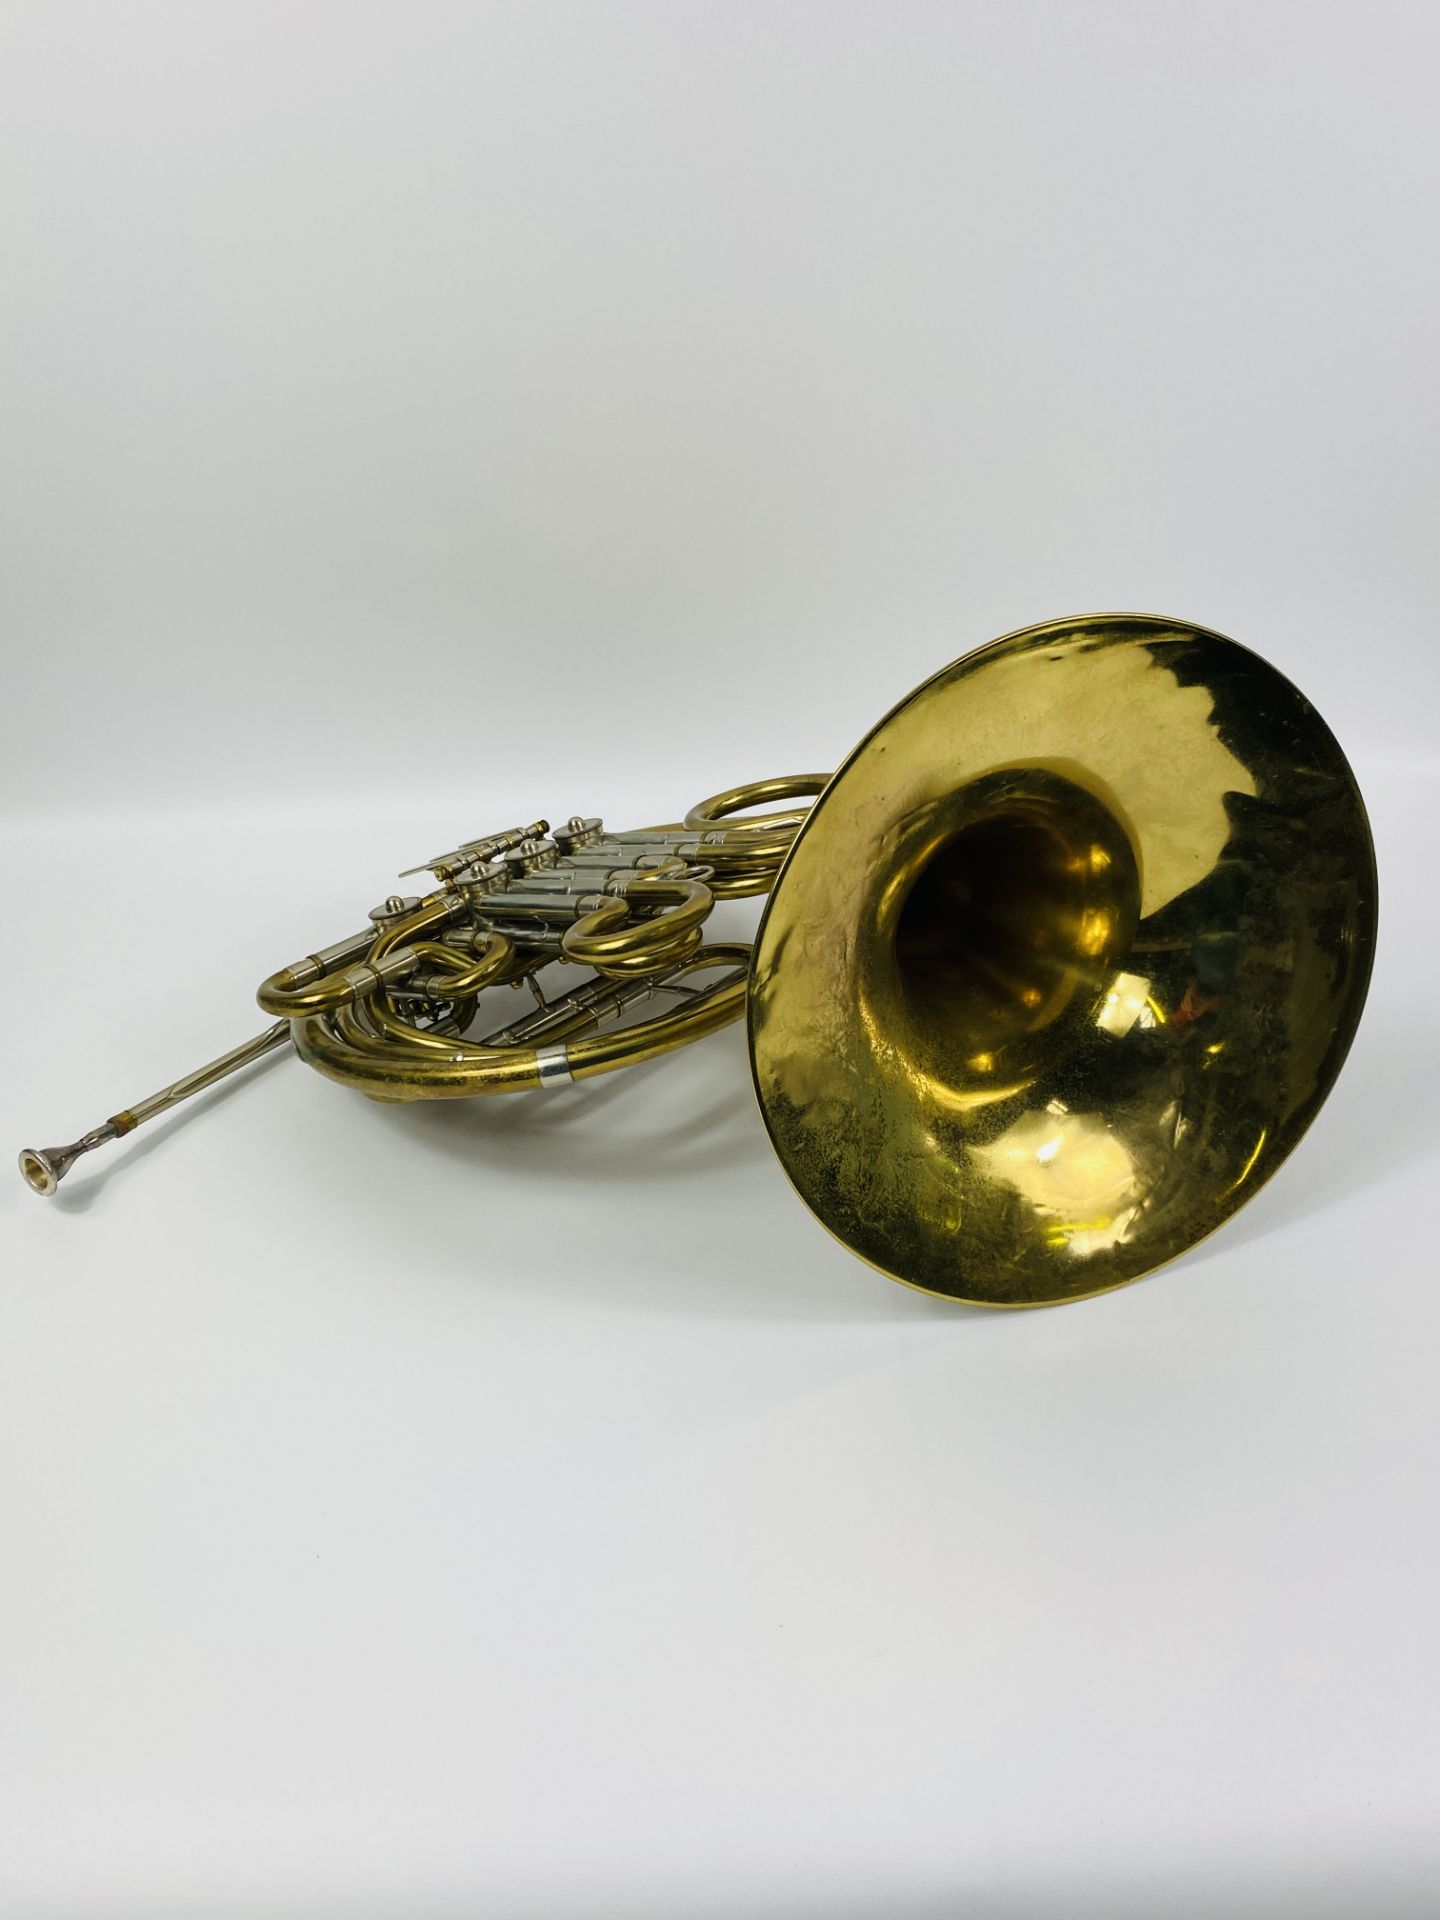 French horn in carry case - Image 5 of 8